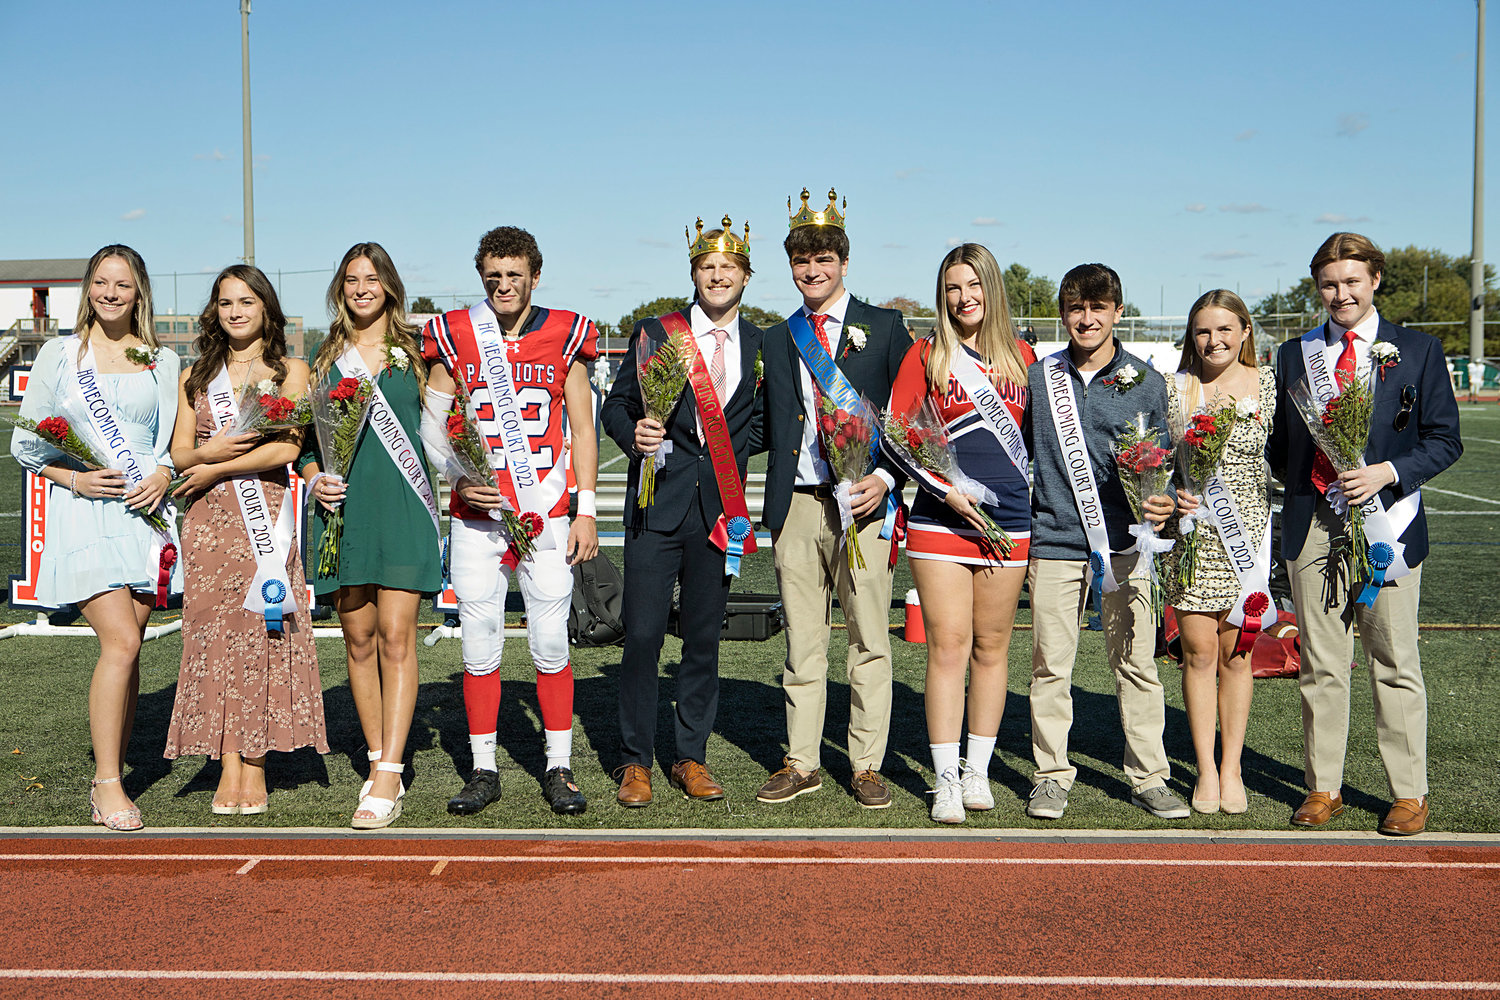 Lining up on the edge of the turf field are Homecoming court members (from left) Avery Snyder, Morgan Levreault, Ava Hackley, Dylan Brandariz, Nick Waycuilis (king), Luke Carlin (king), Phoebe Tavares, Andrew Alvanas, Elise Kirwin, and Jack Hollen.